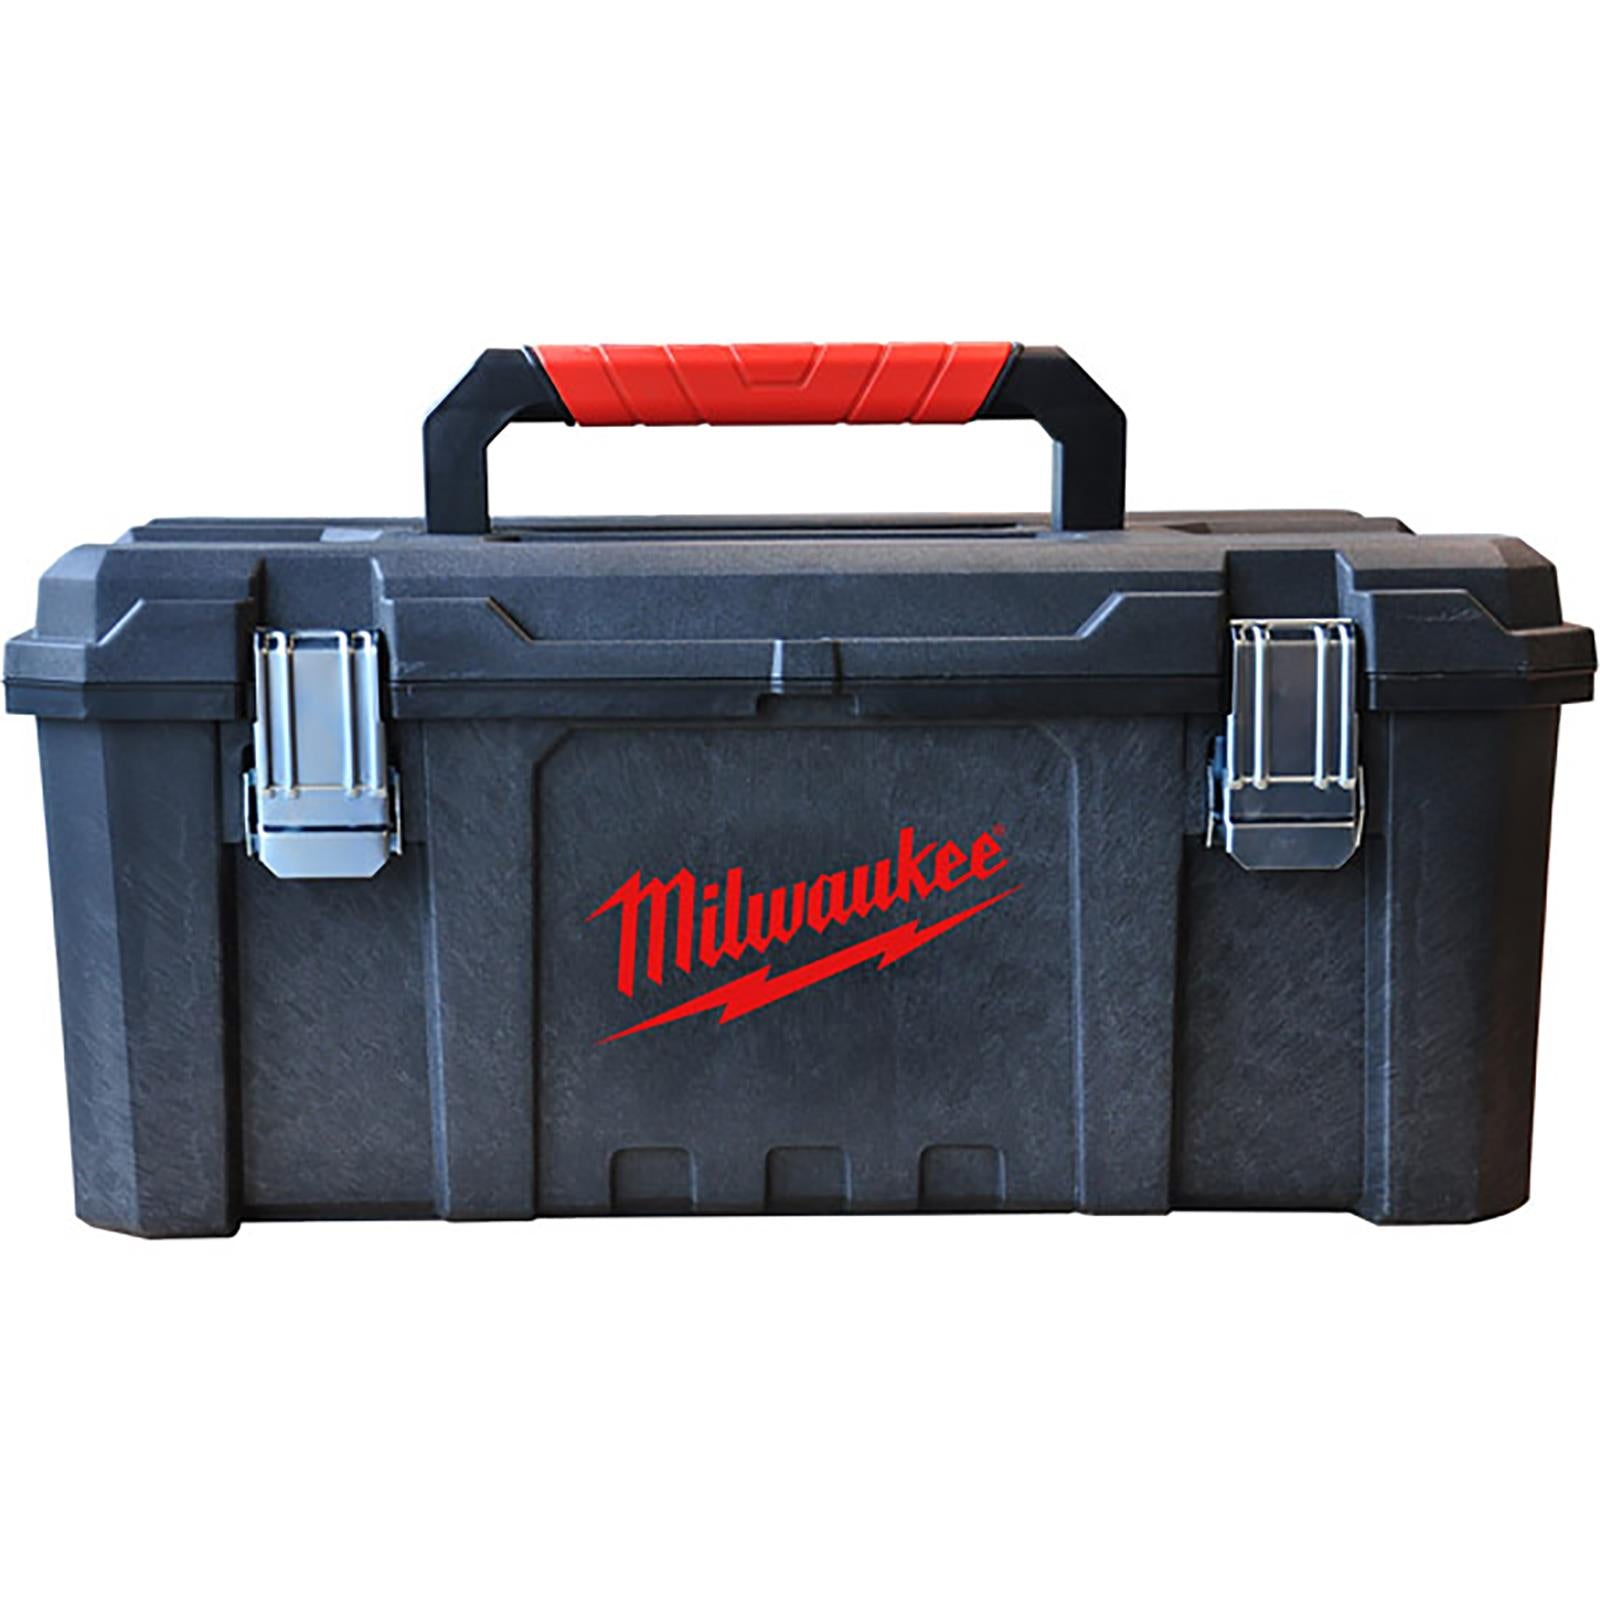 Milwaukee Site Toolbox Heavy Duty 21in Metal Latches and Internal Tote Tray